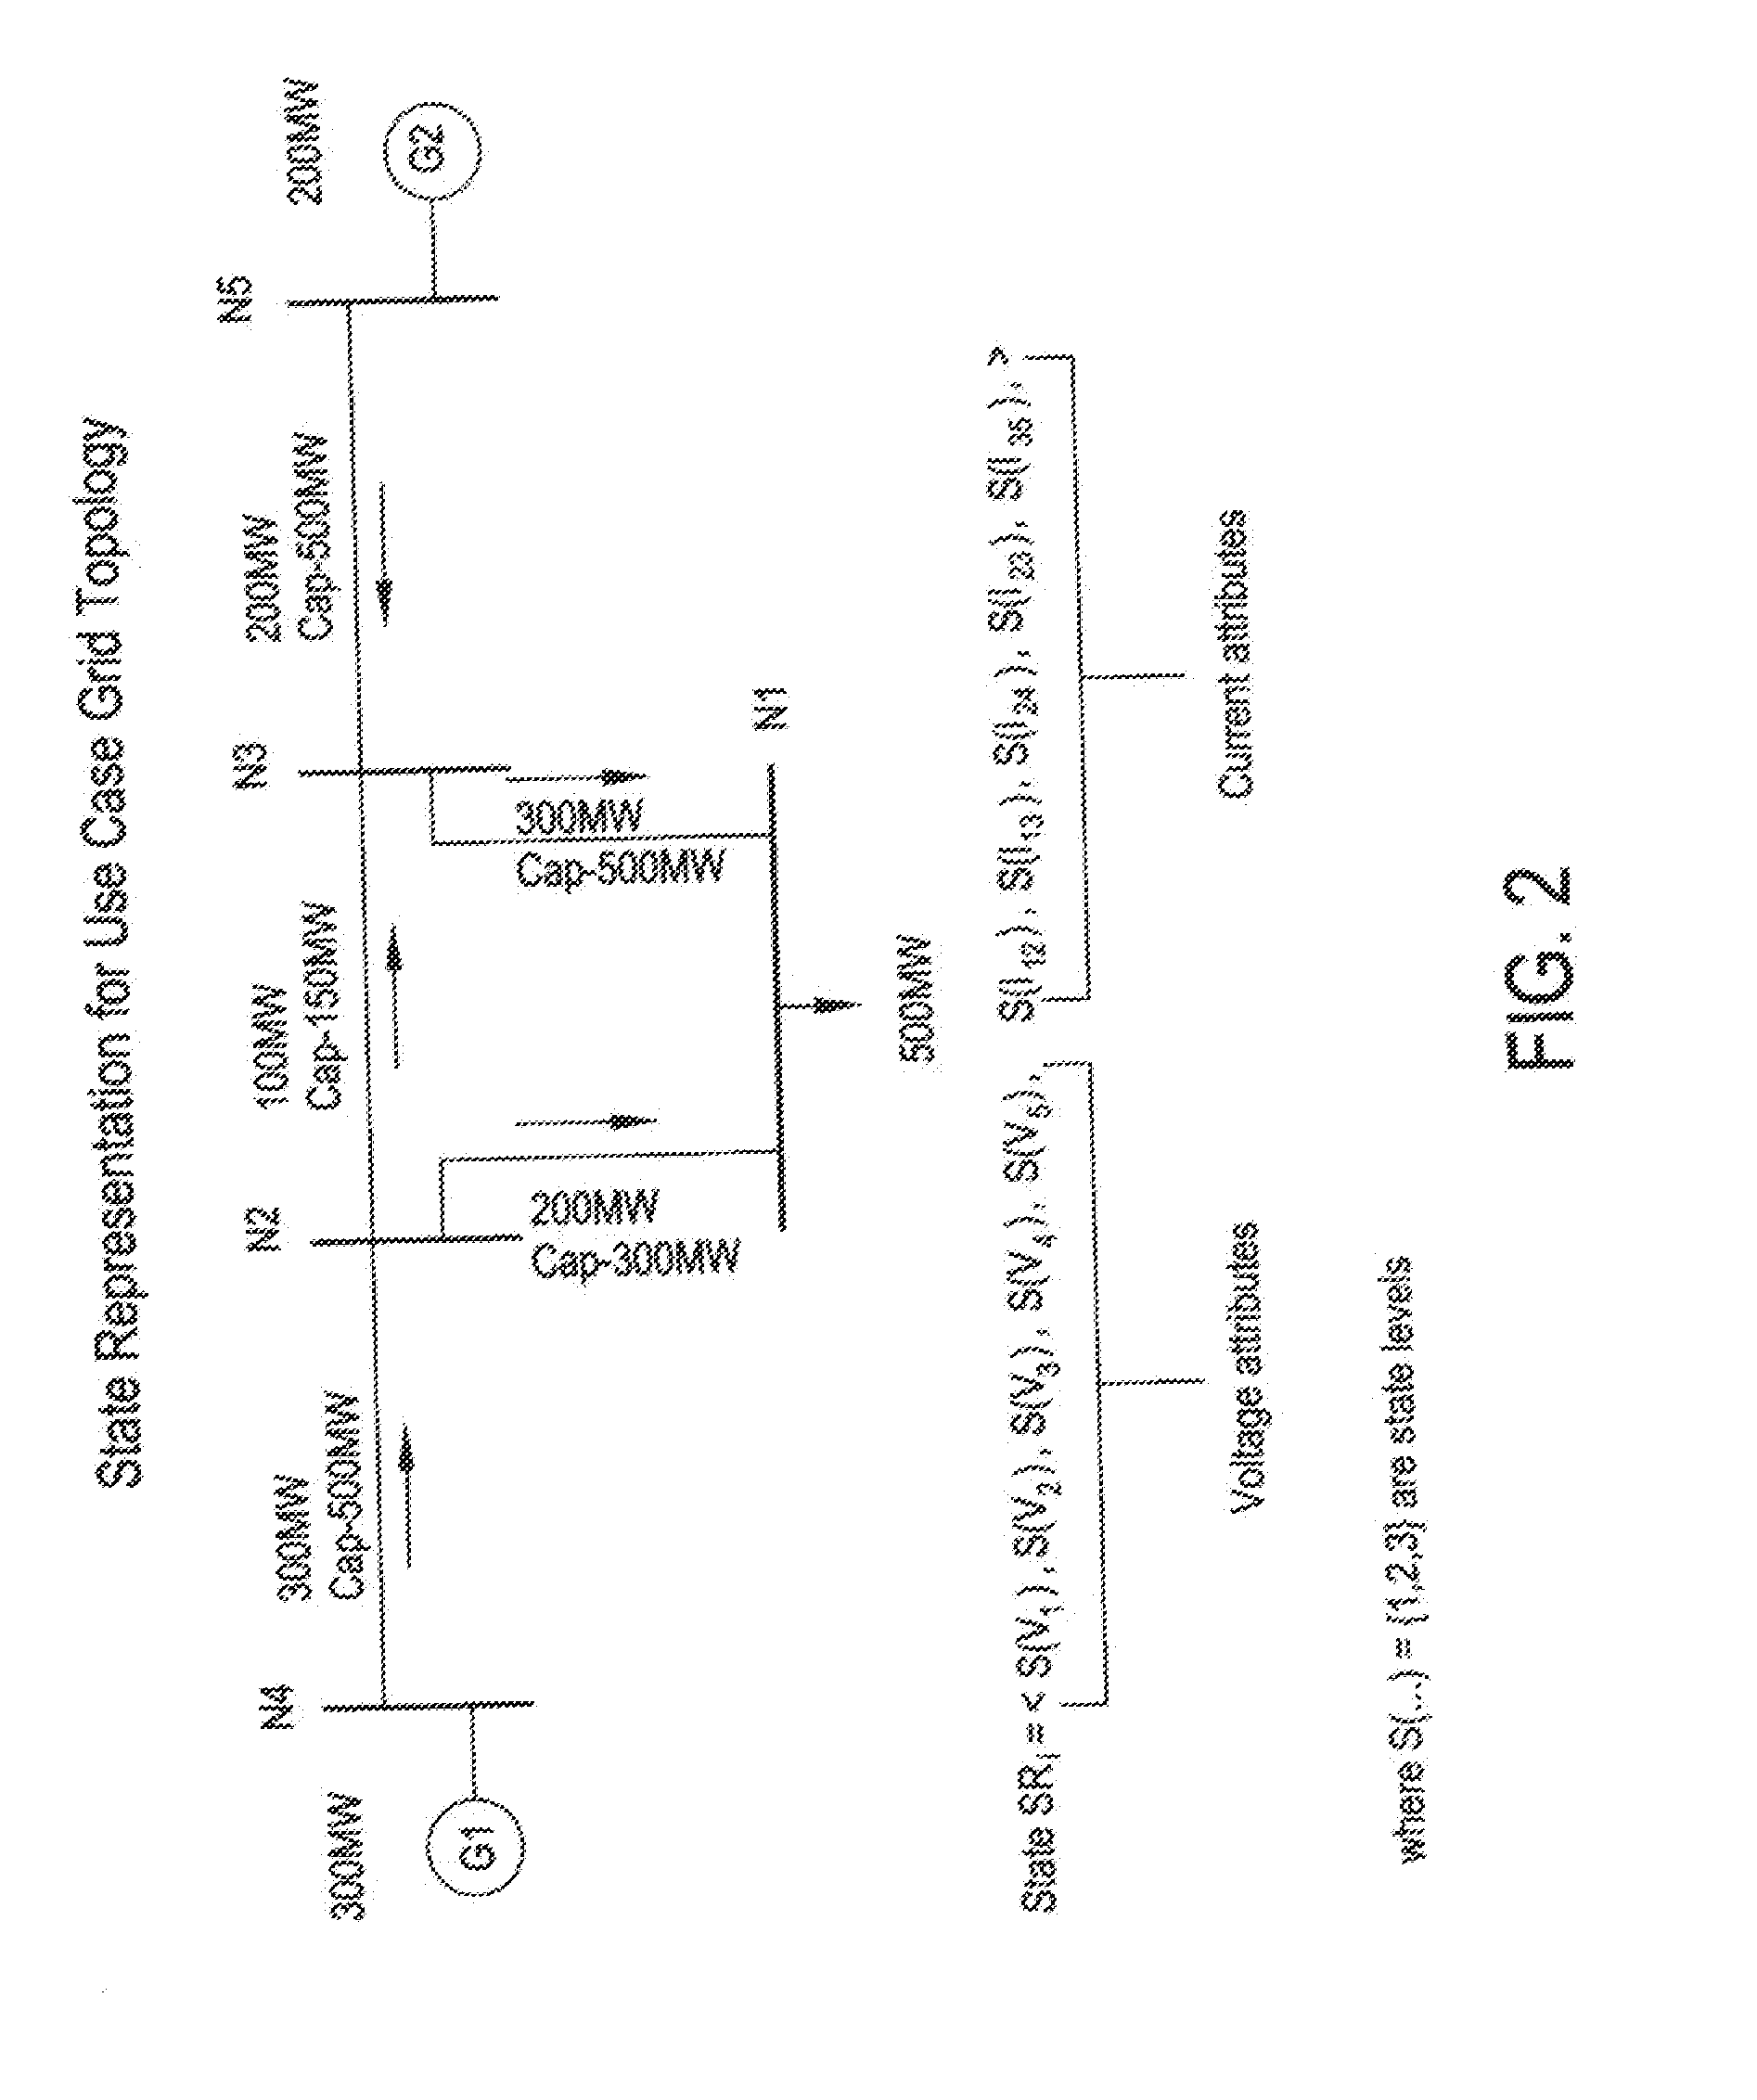 System and method for cognitive alarm management for the power grid